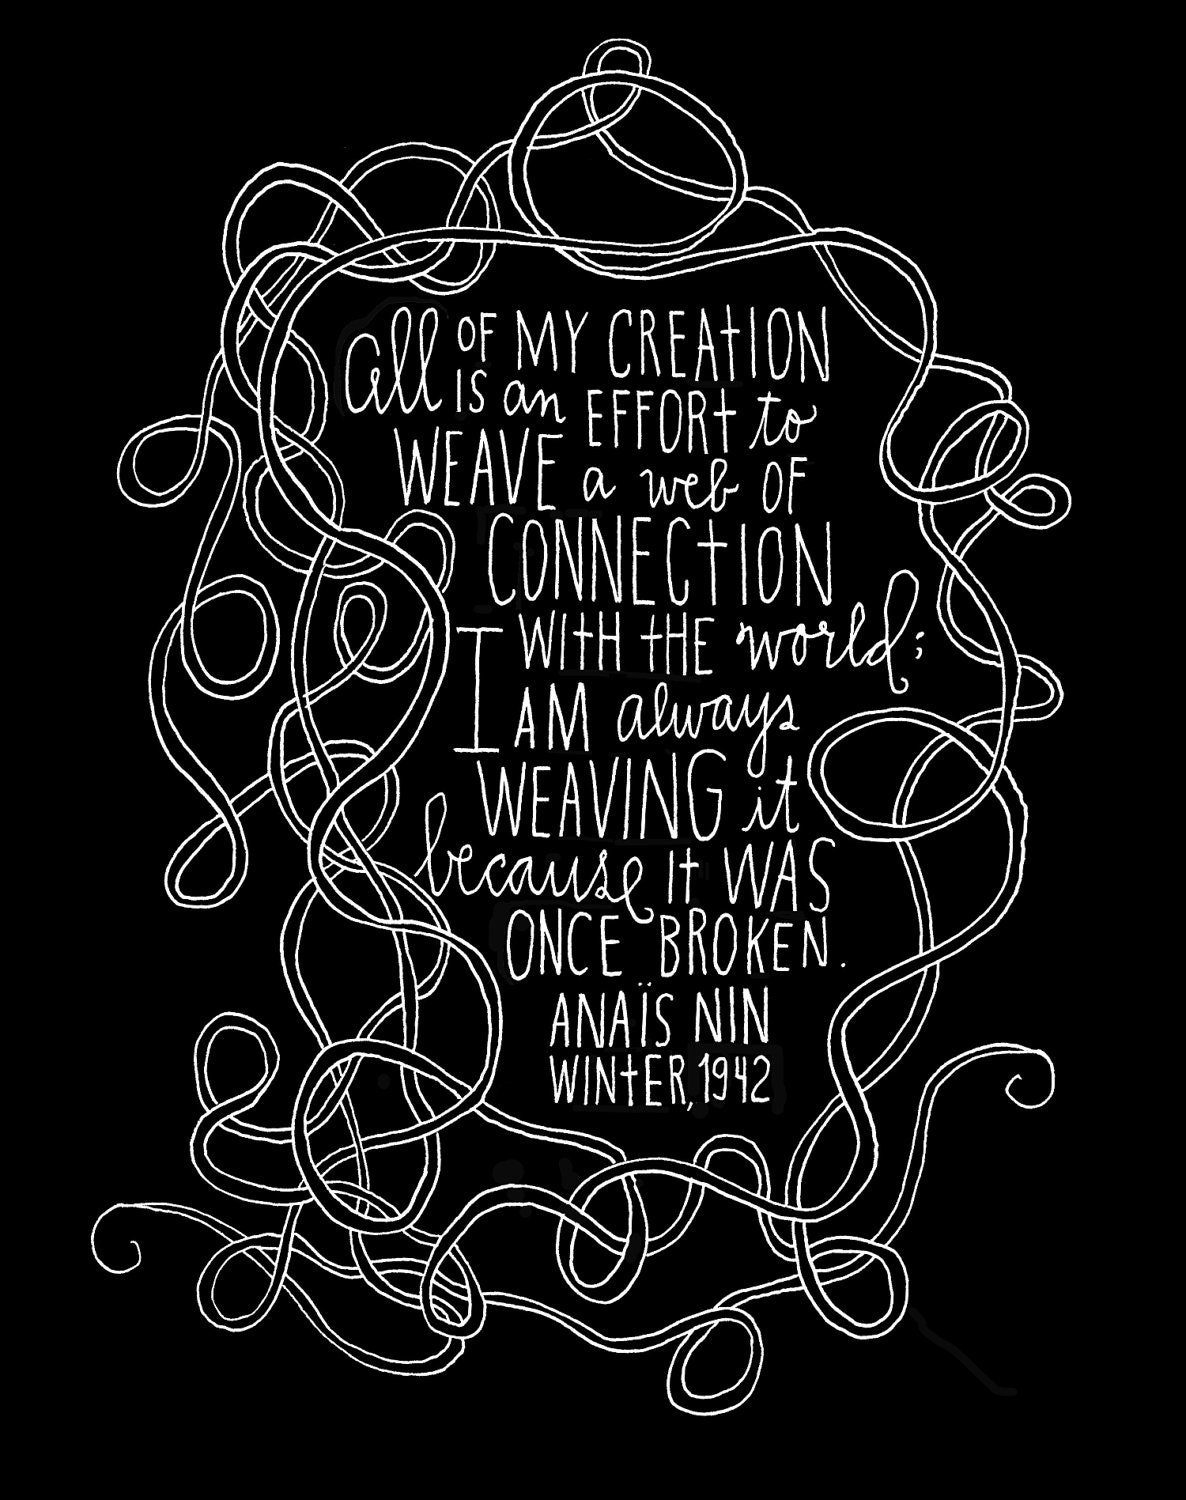 Anais Nin Quote - Web of Connection Archival Print - Standard Size